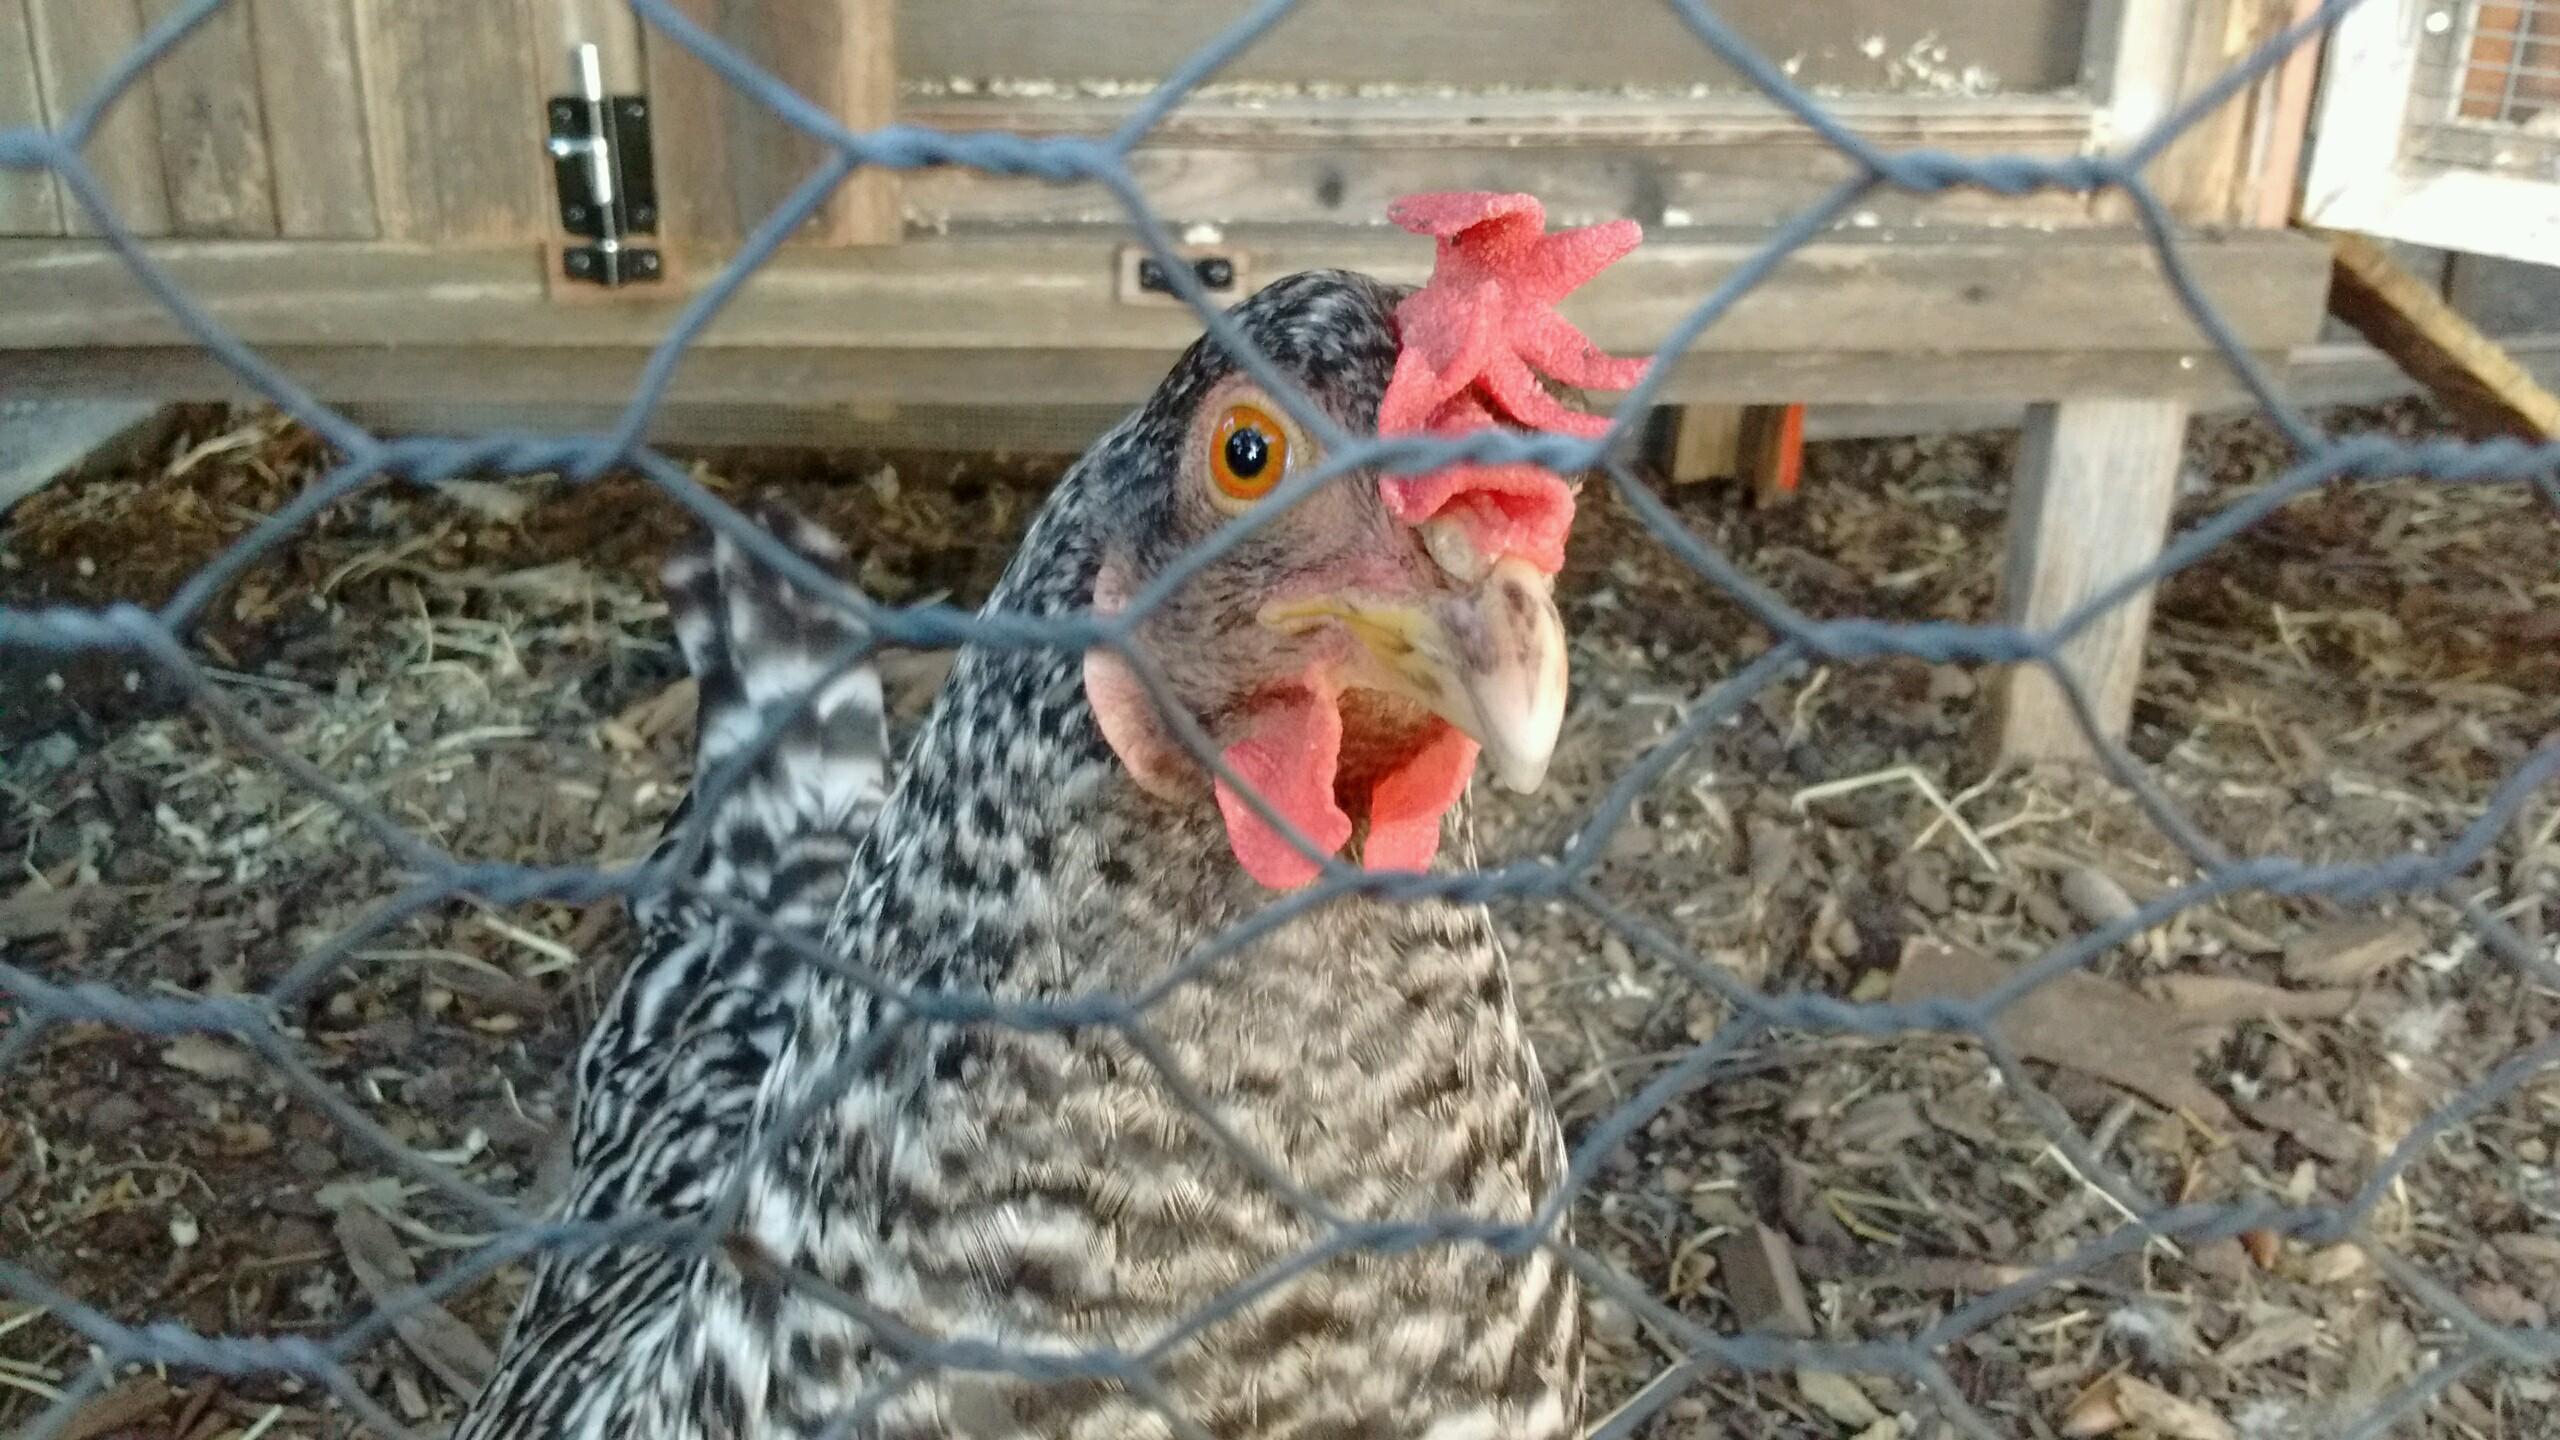 Audrey keeping a wary eye out for threats to her chicks